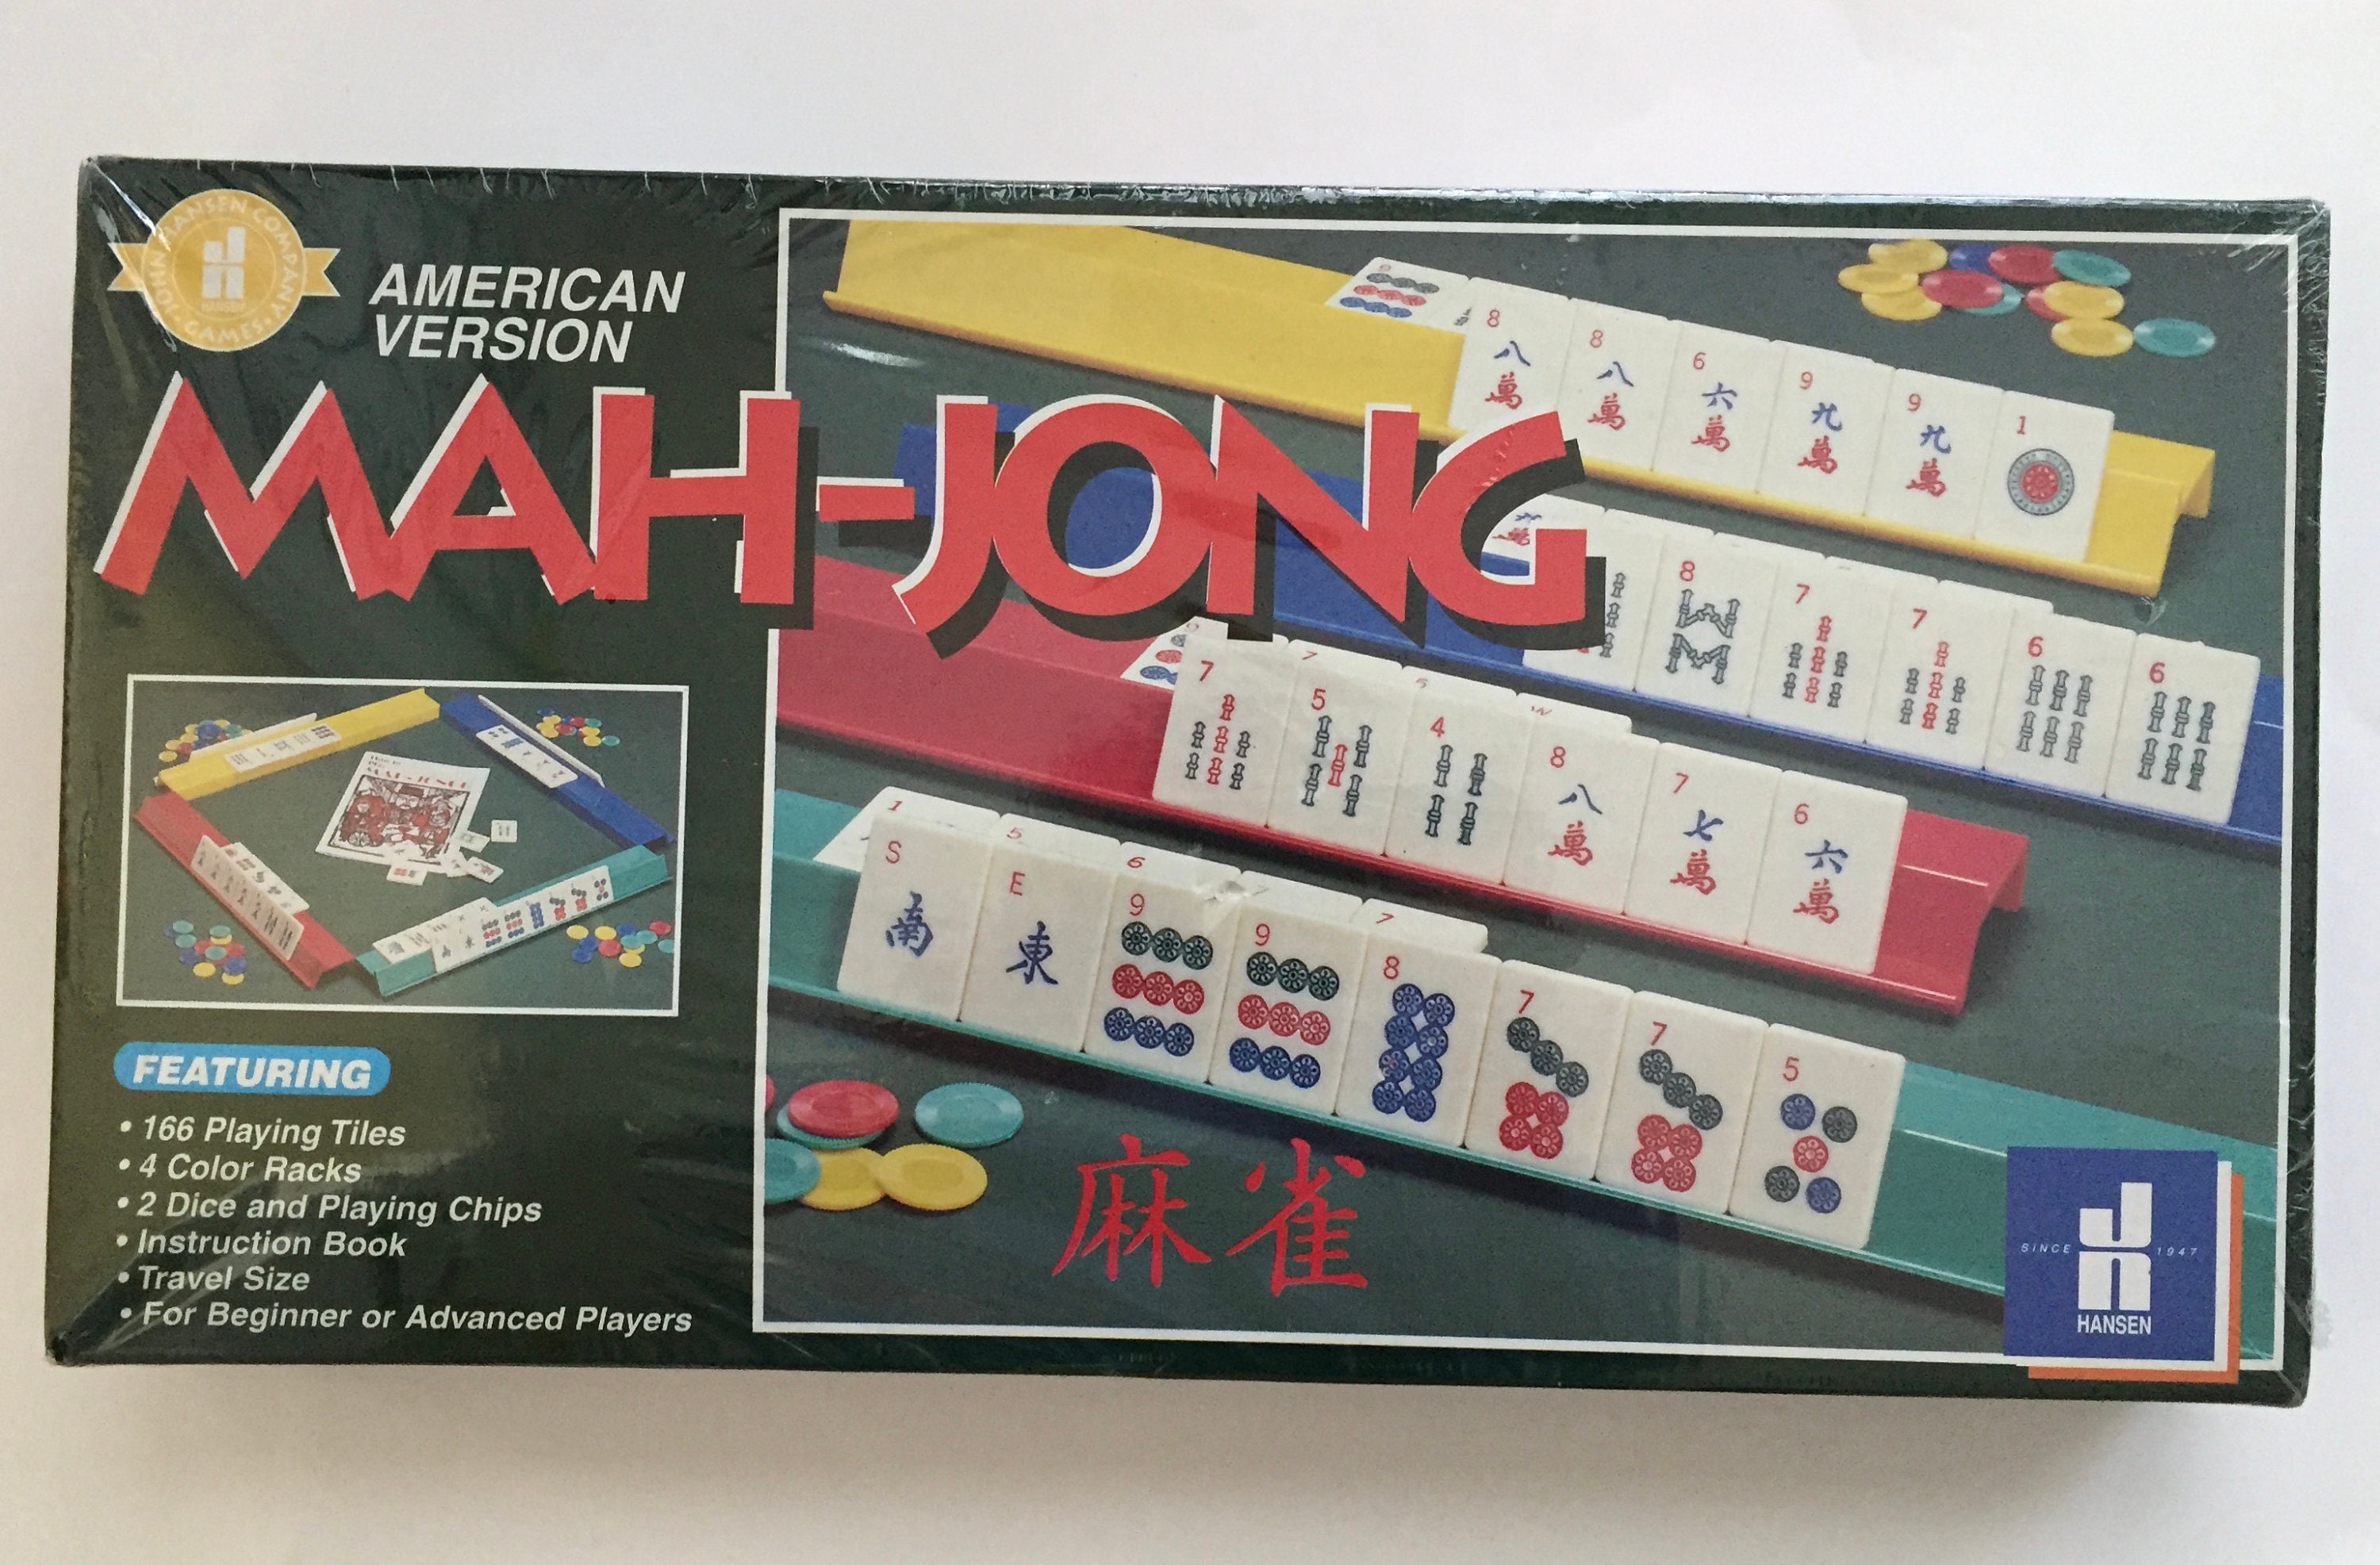 Classic Chinese Mahjong Game Set - White - with 144 Small Size Tiles, a  Wooden Leather Case, English Introduction - Chinese Play